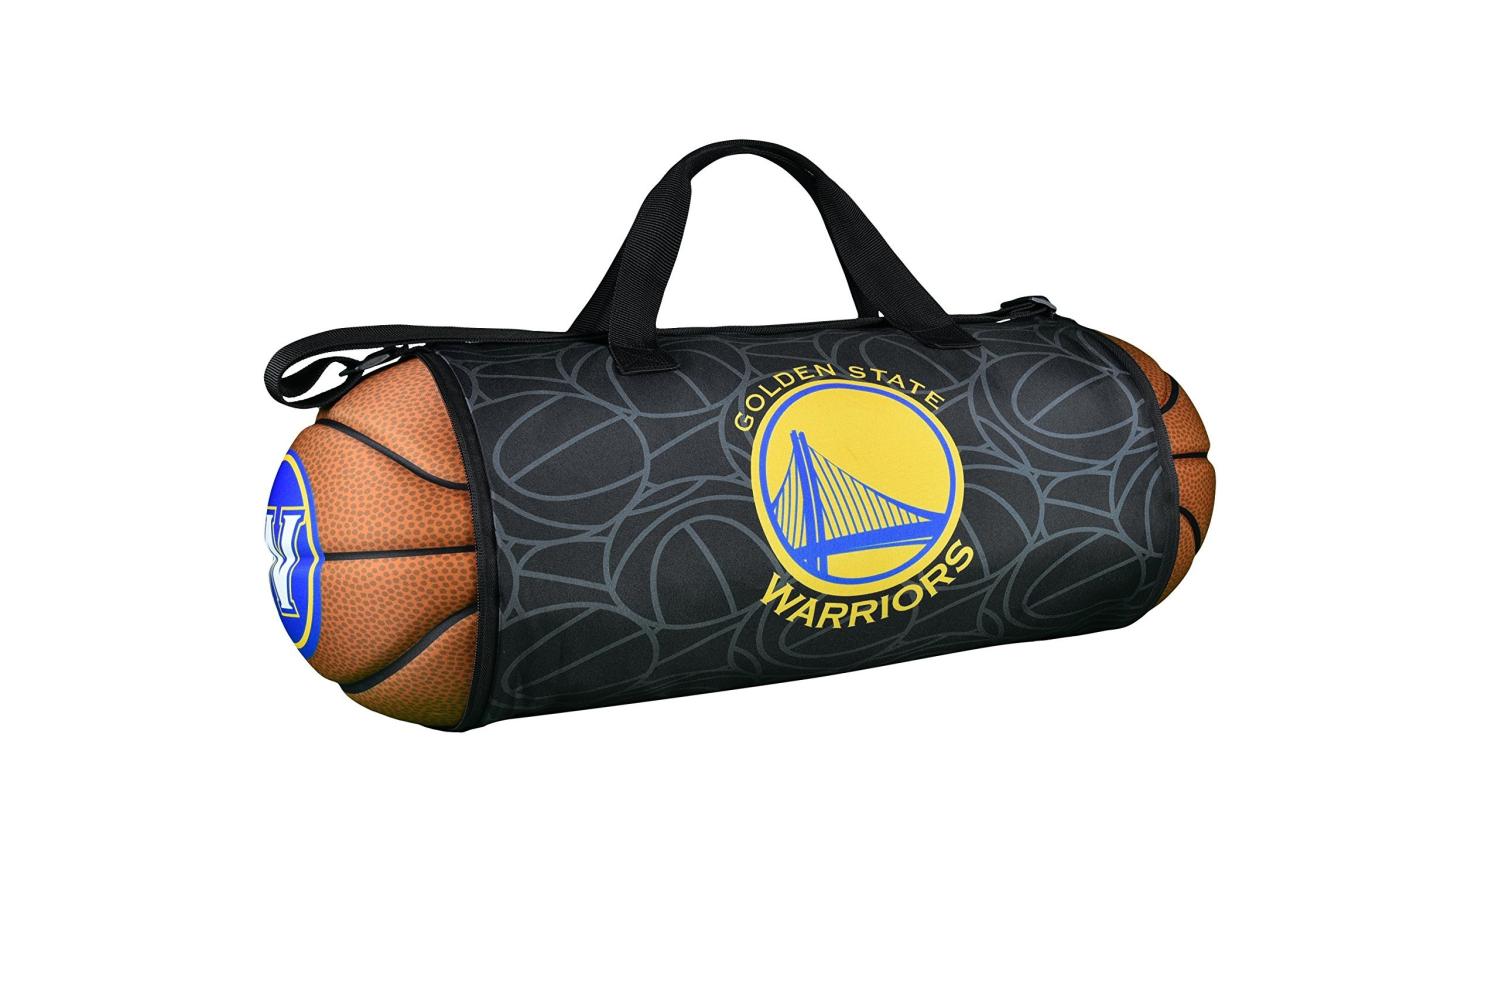 Official LA Clippers Duffel Bag for Sports/Basketball – Foldable/Extendable